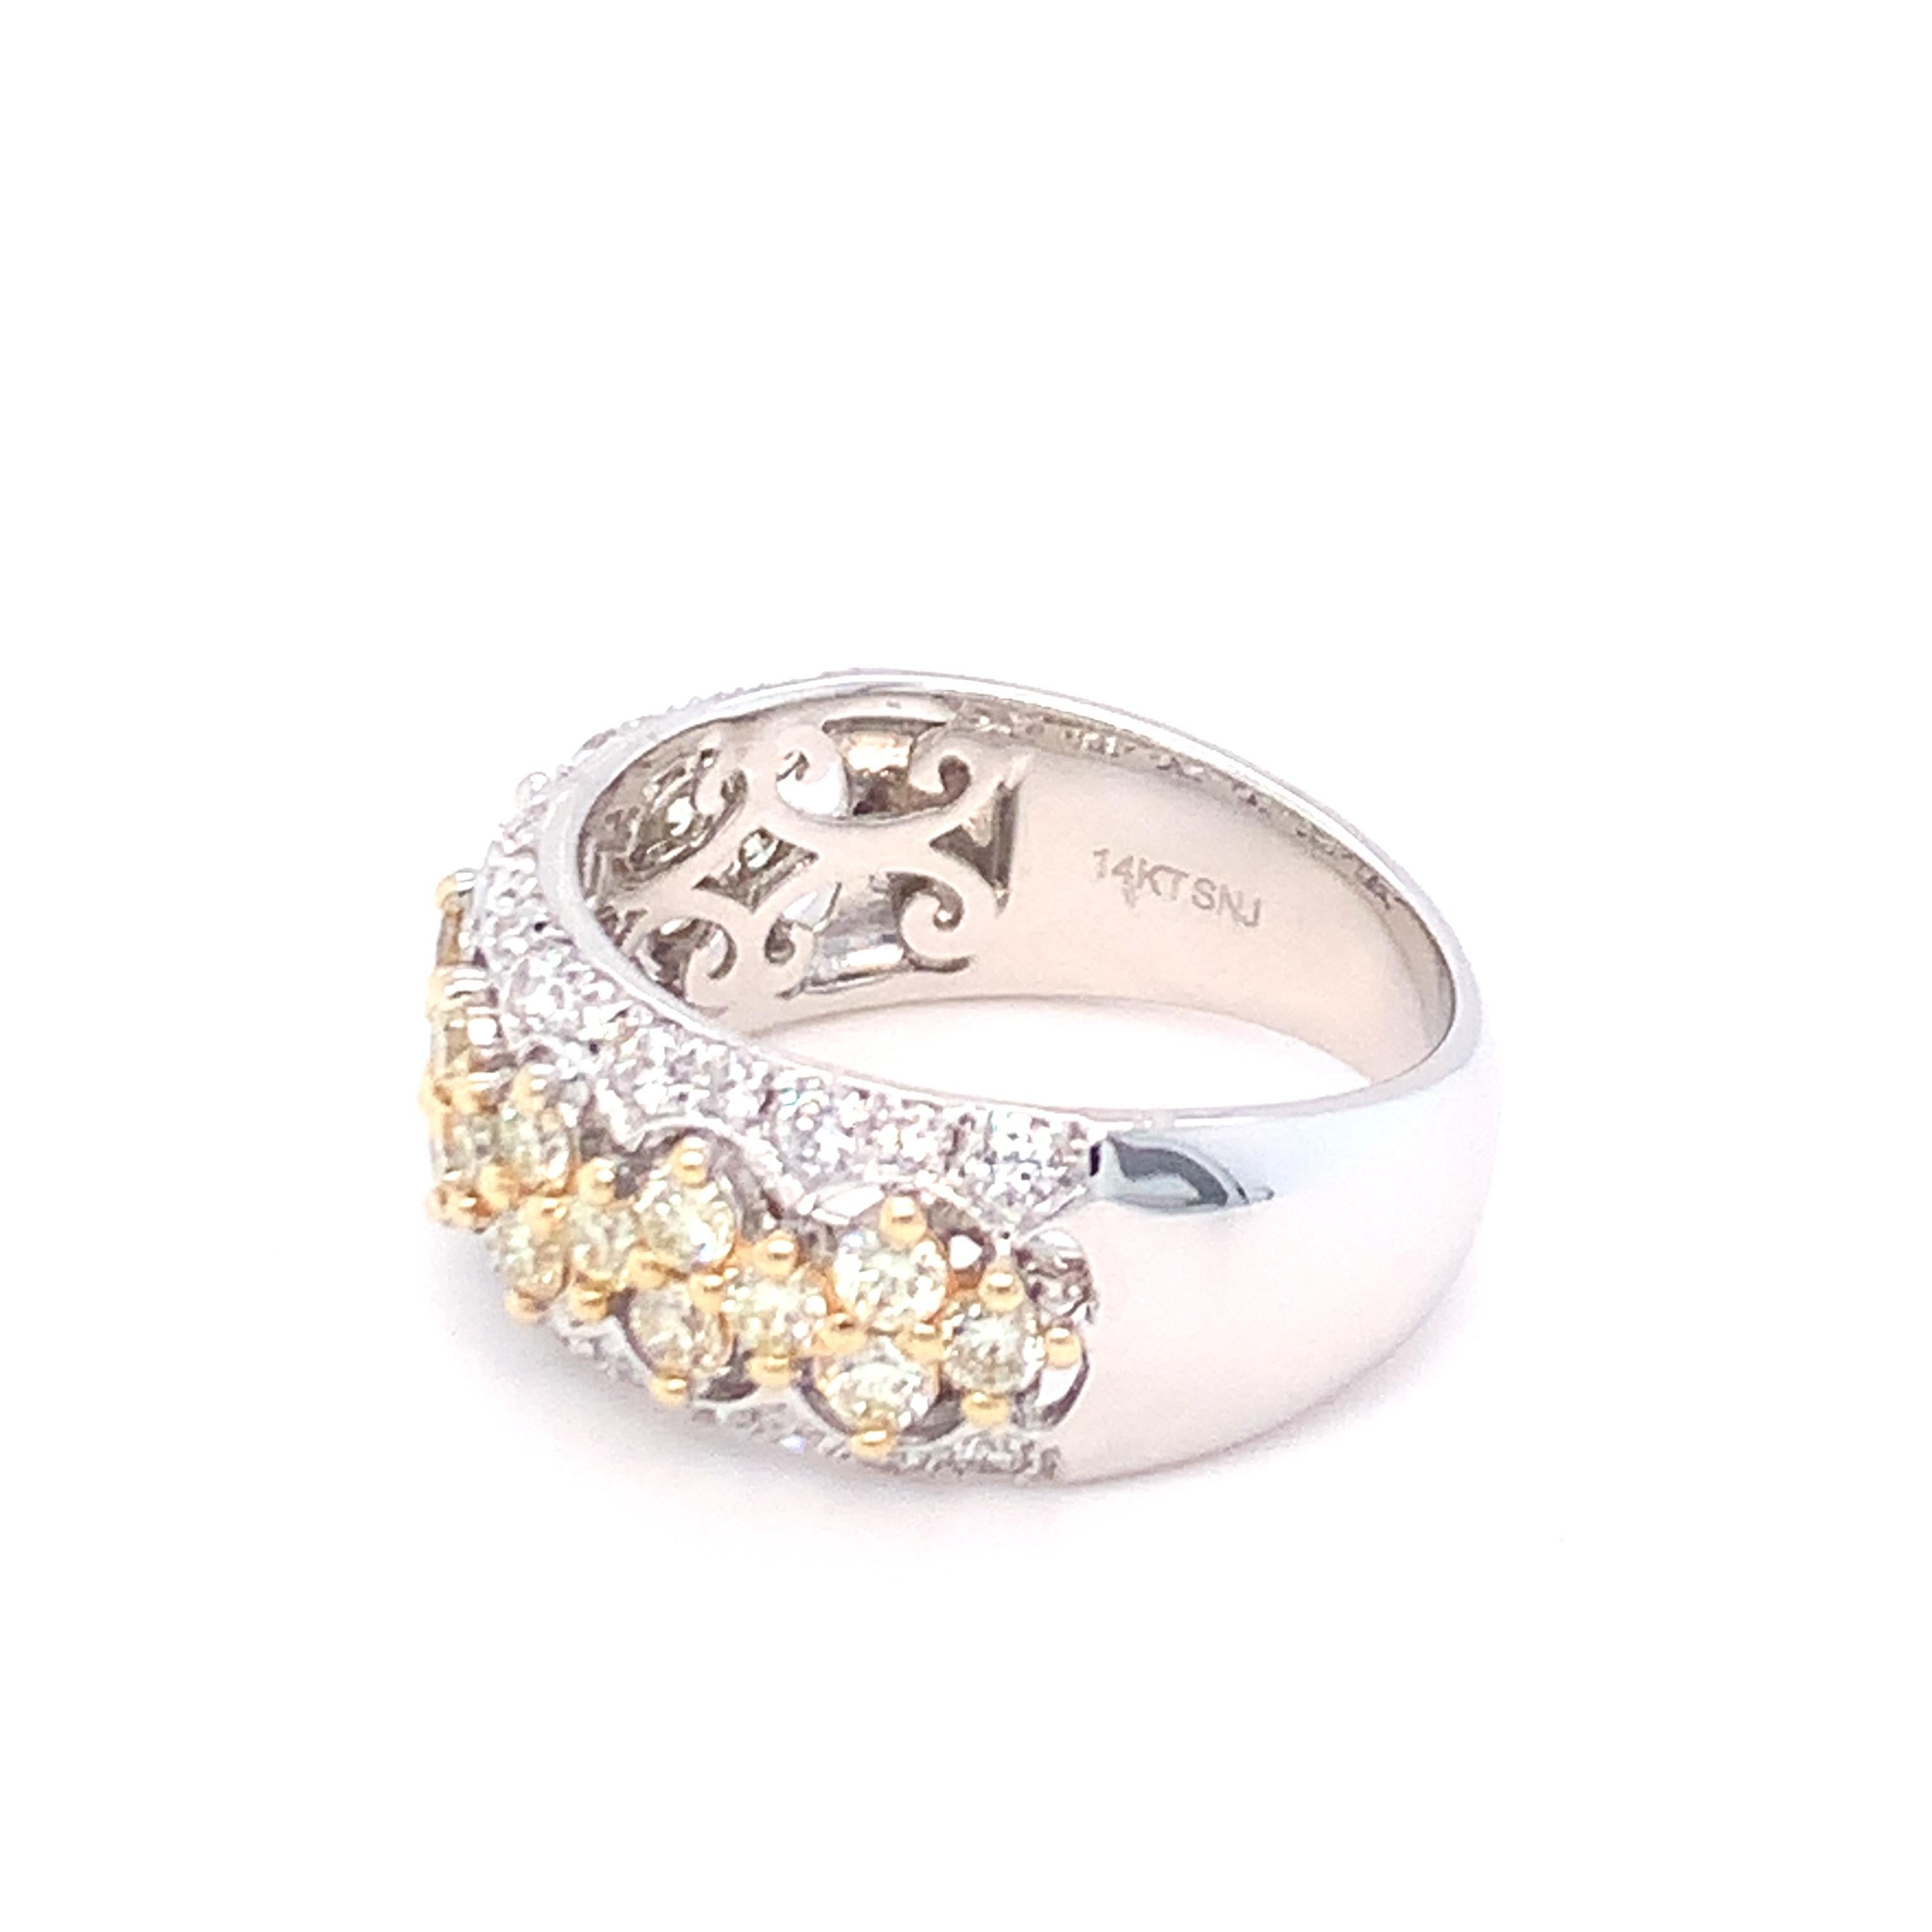 1.45 Carat Yellow & White Diamond Band Ring in 14K White Gold For Sale 3